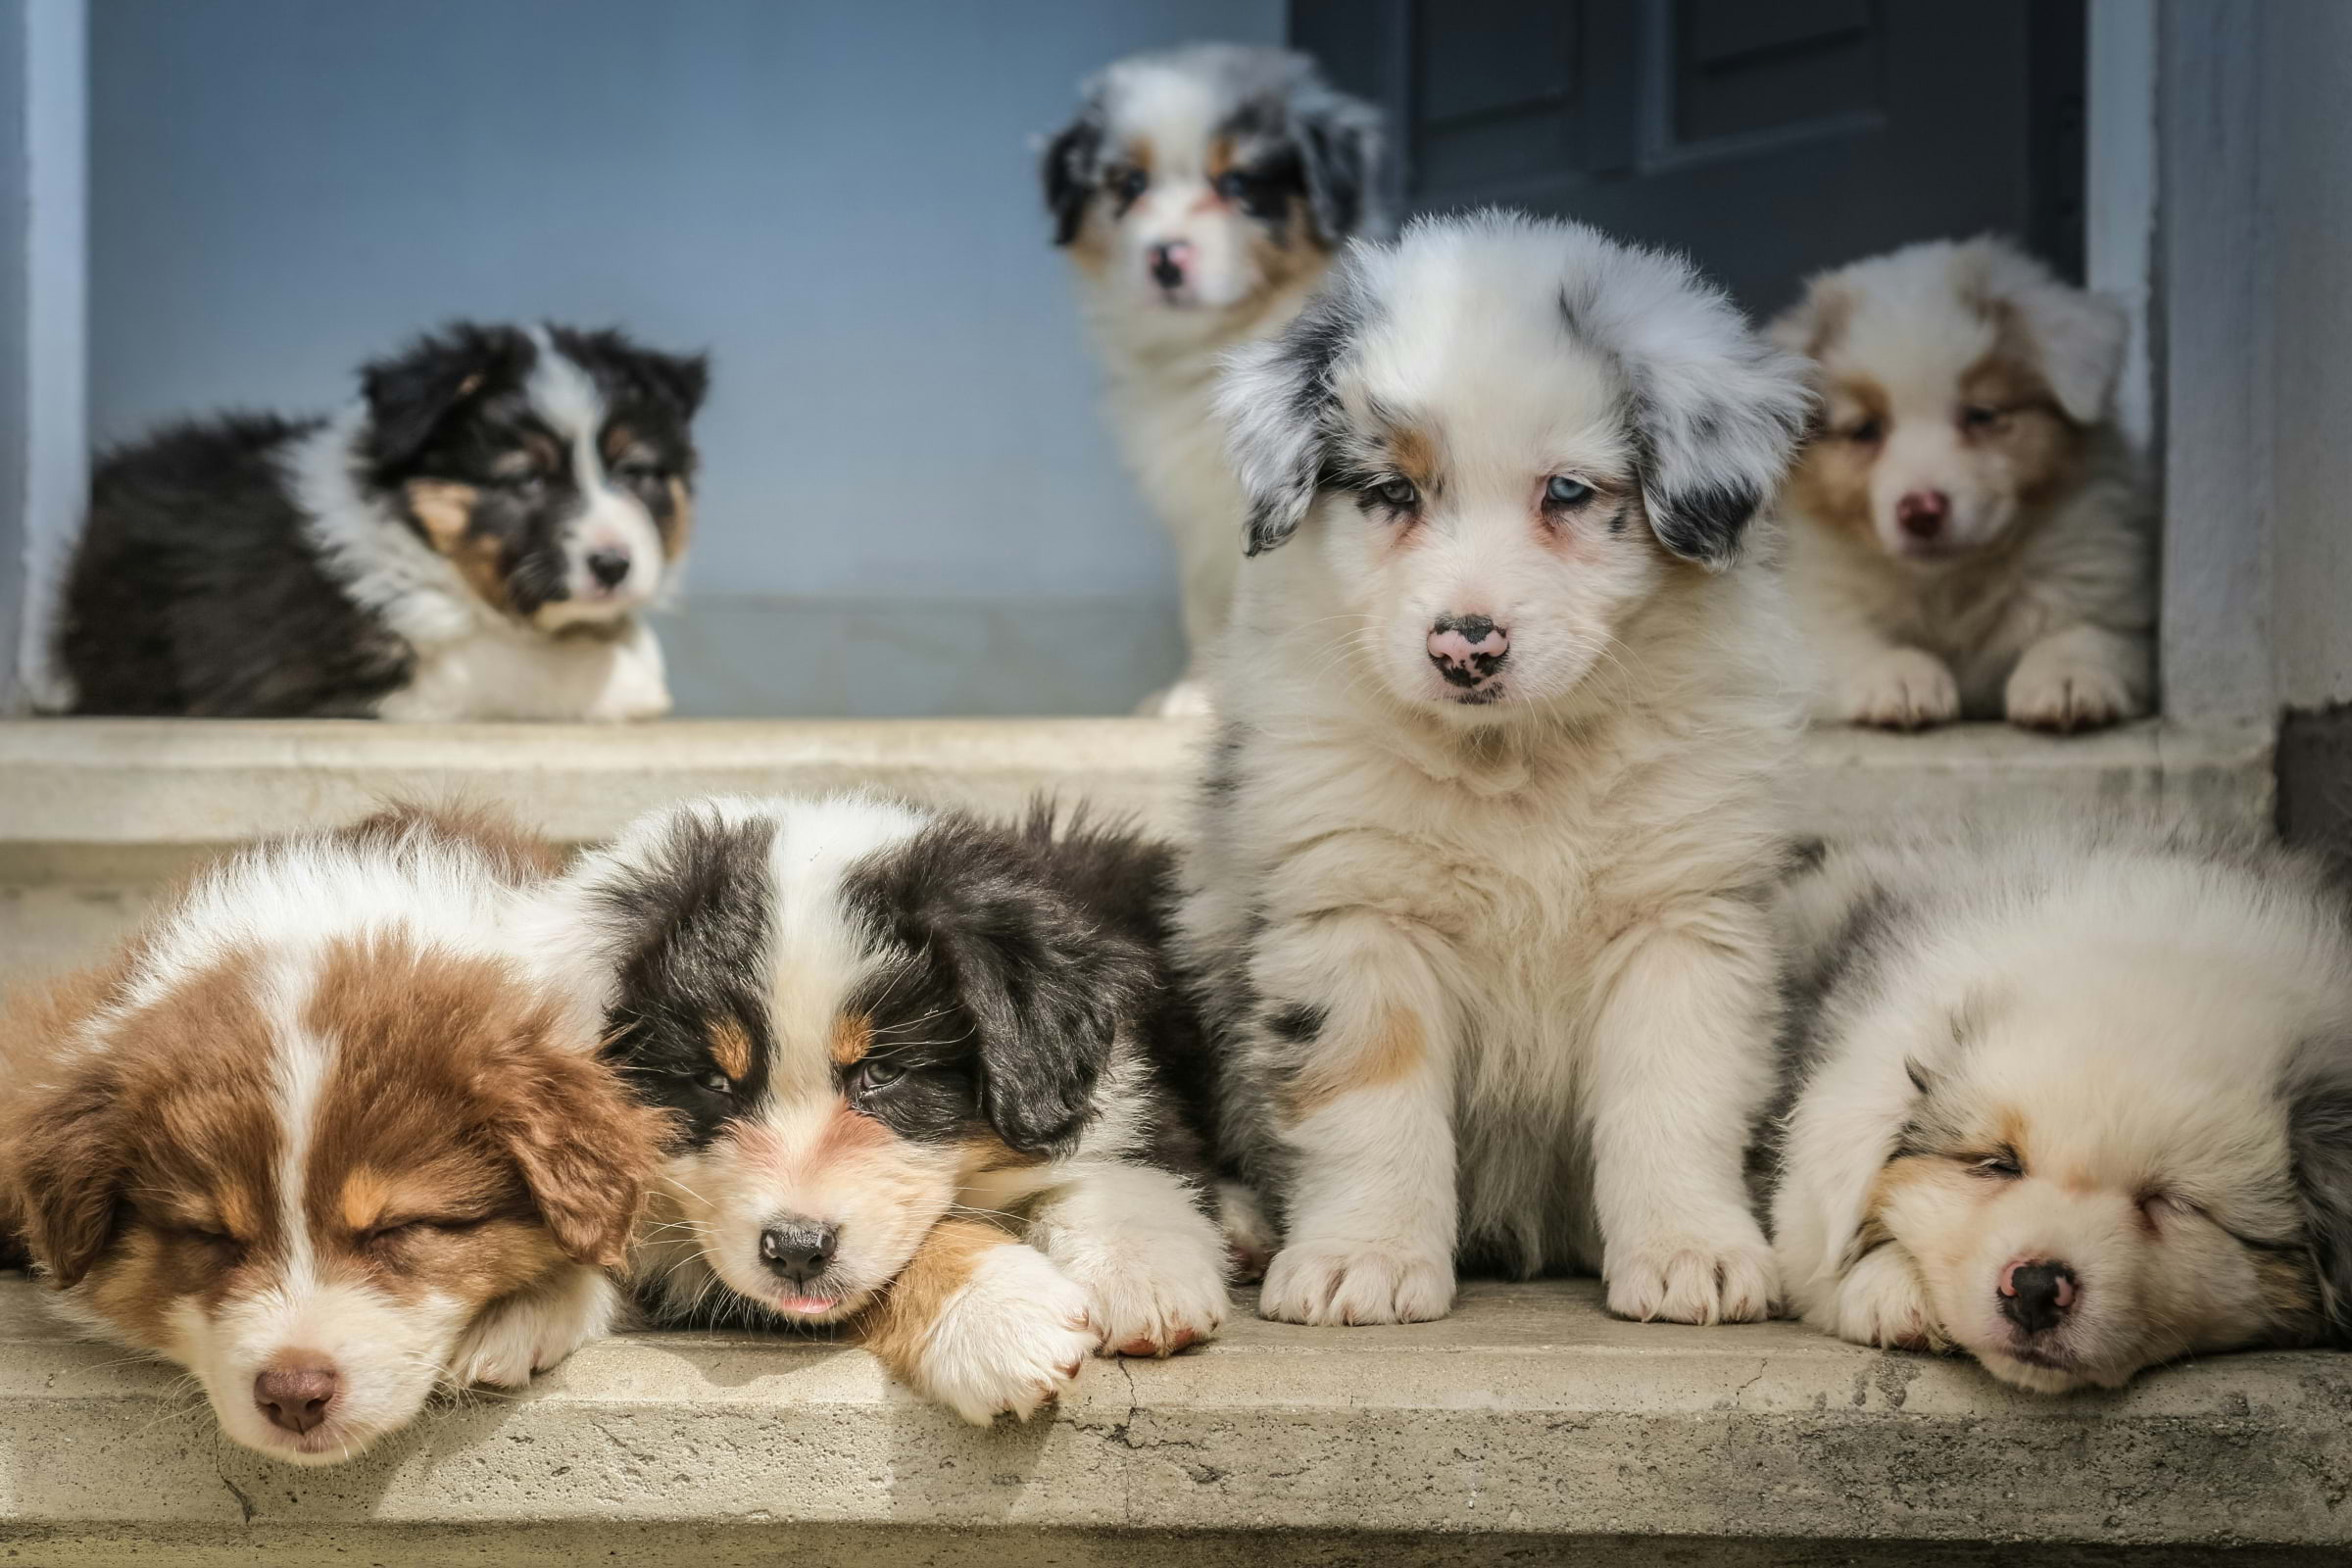 Get your puppy cuddle fix in February at this South London pub